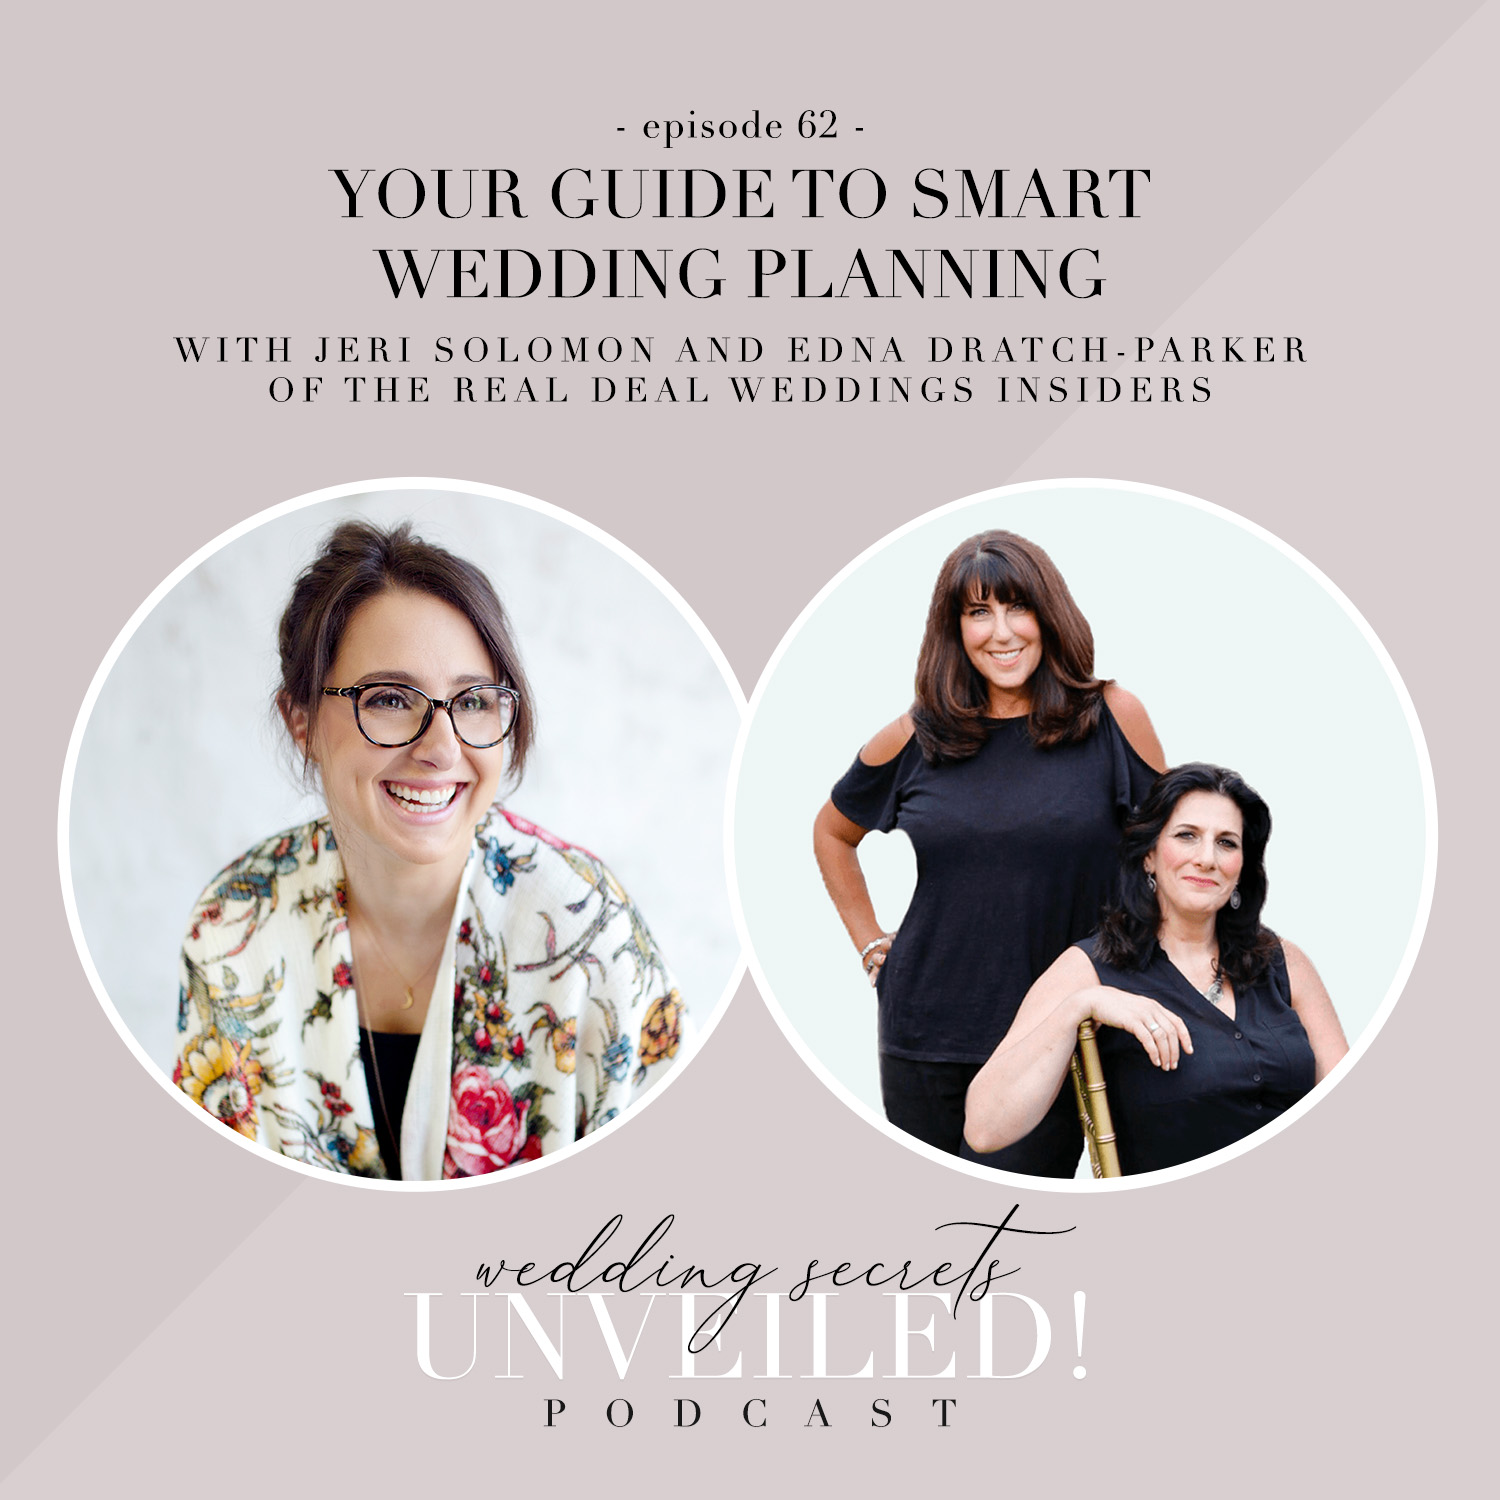 The Guide to Smart Wedding Planning with Jeri Soloman and Edna Dratch-Parker of The Real Deal Wedding Insiders on Wedding Secrets Unveiled!